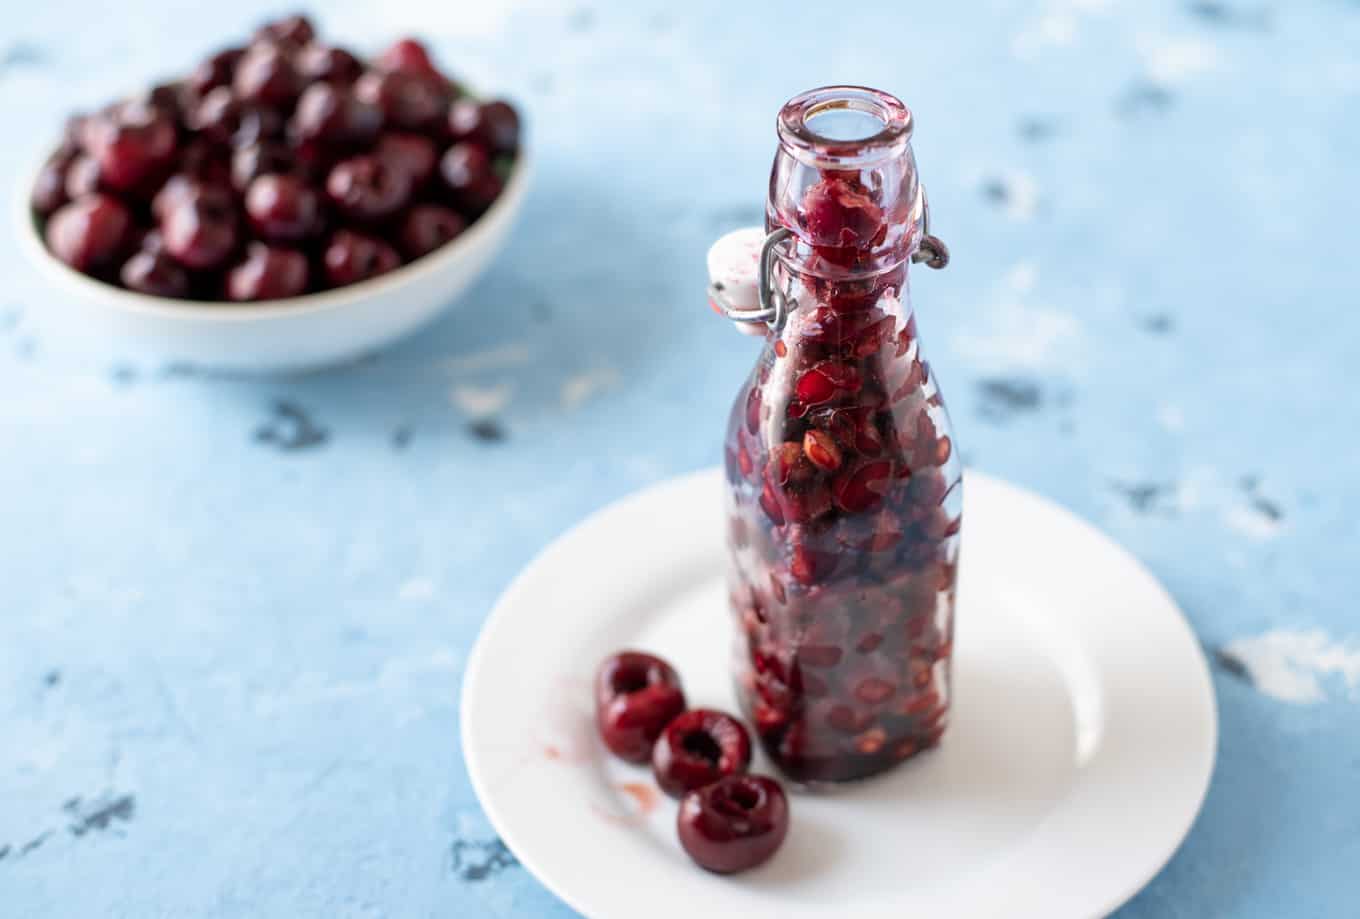 A bottle of cherry pits with some pitted cherries on a plate.